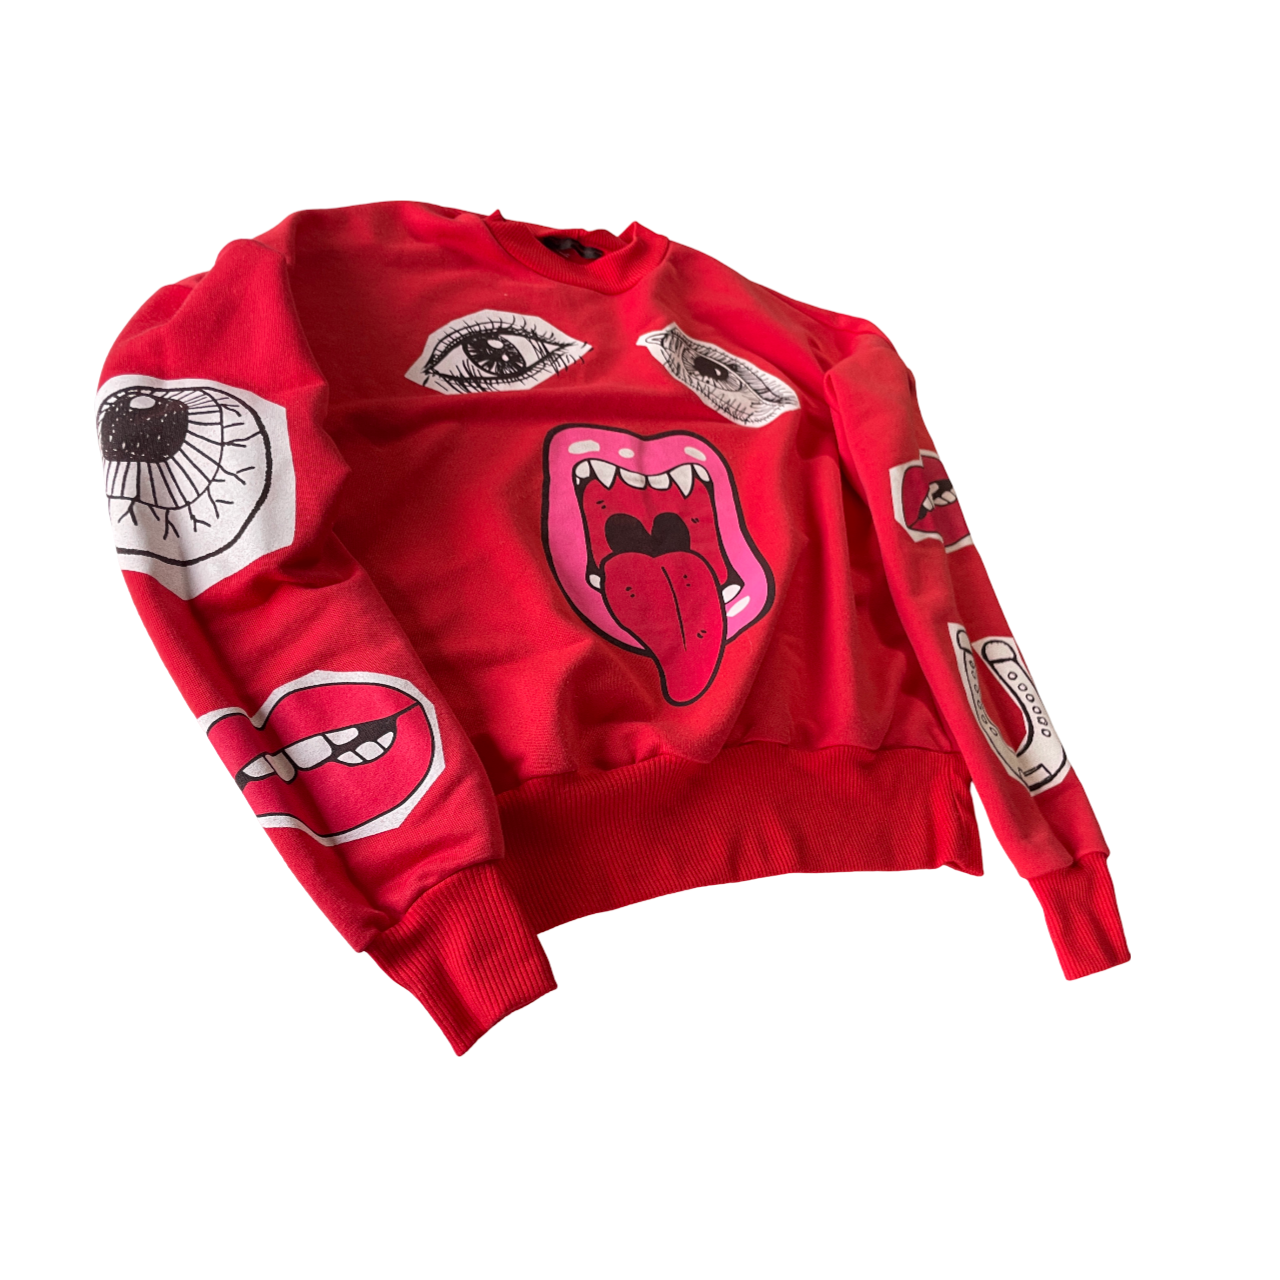 Abstract Face Printed Pink Sweater RED EYES LIPS PRINTED SWEATSHIRT - L 26 W 26 SKU 5159